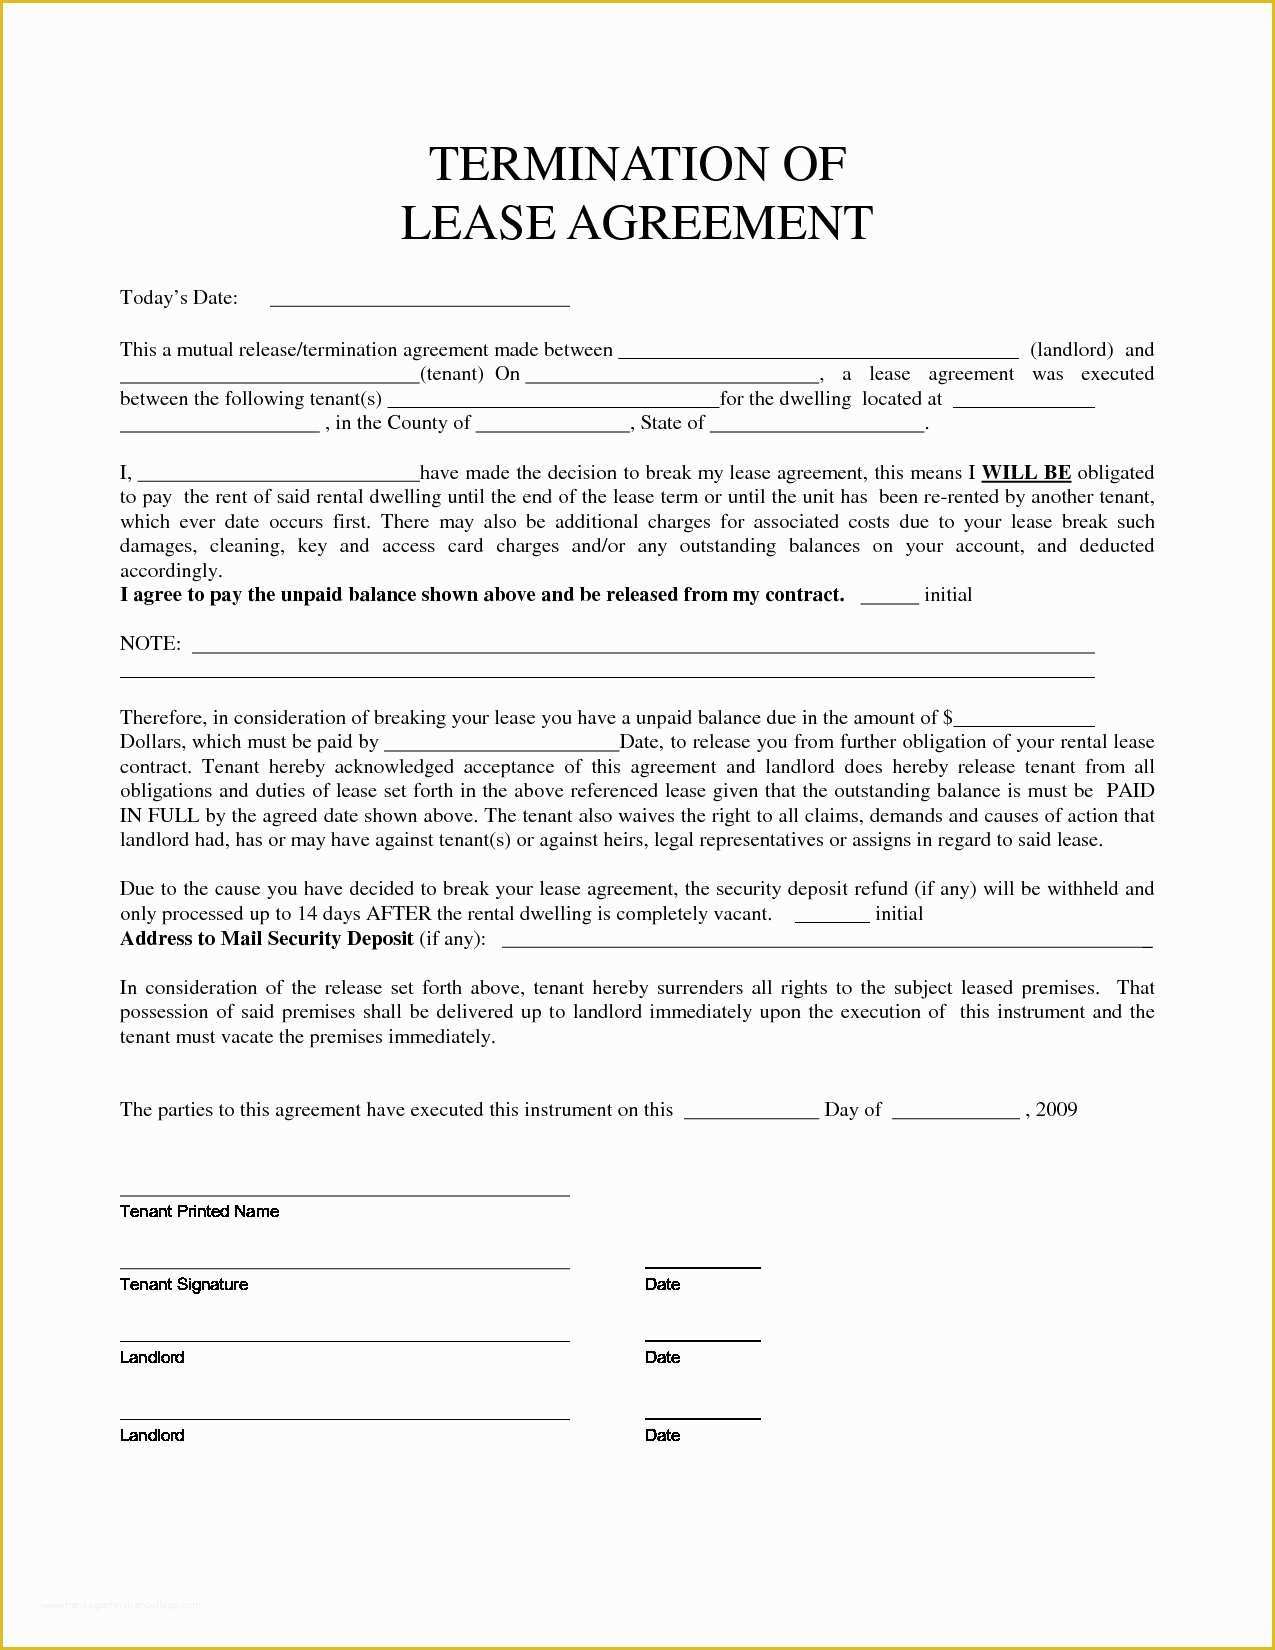 Lease Agreement Template Free Of Early Termination Lease Agreement Template Templates